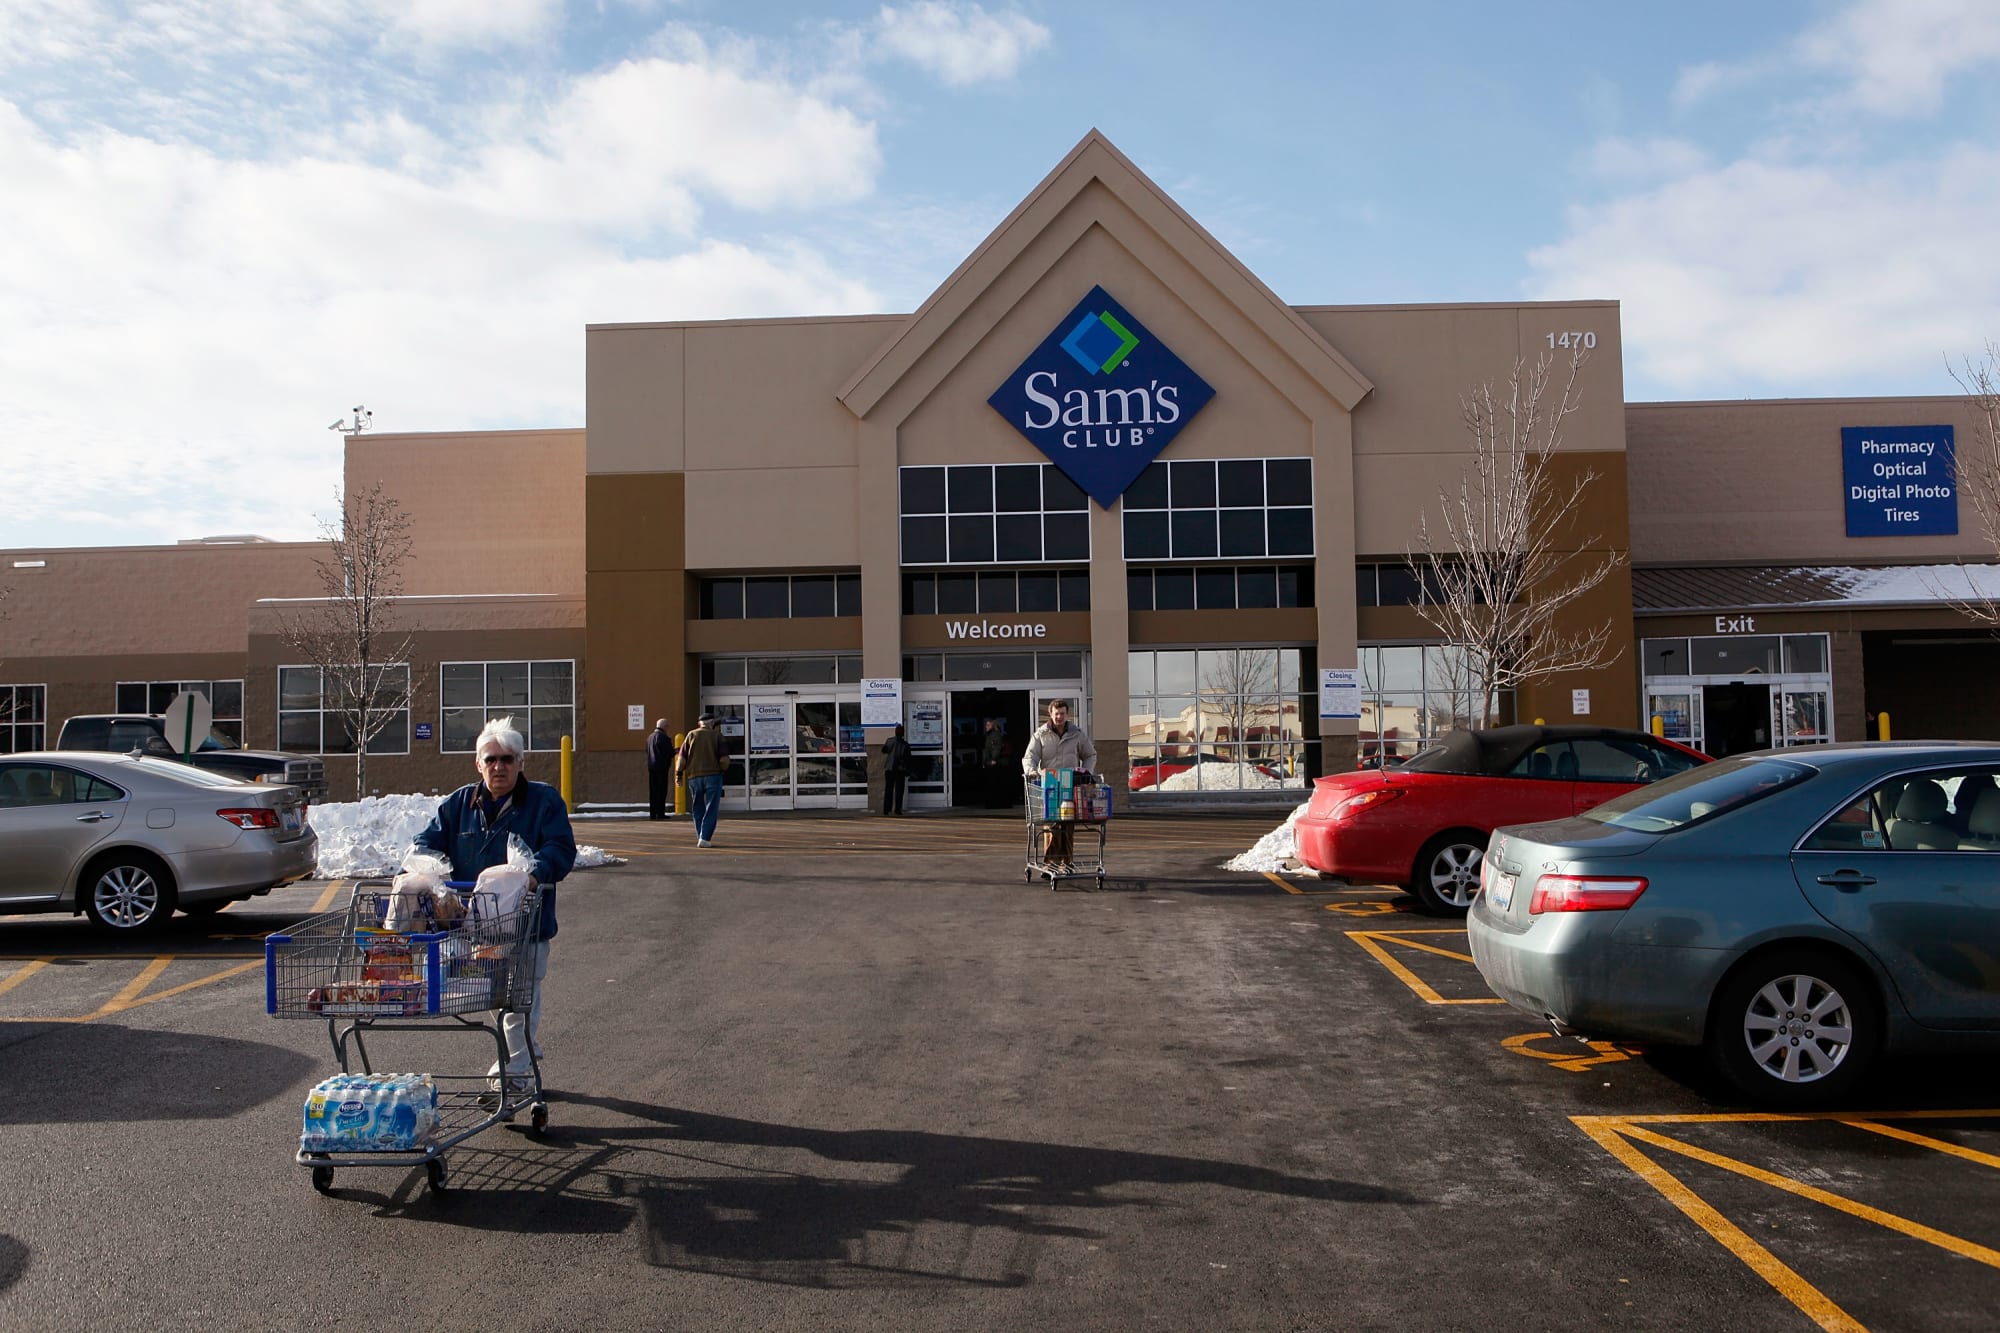 Is Sam's Club open on New Year's Eve 2016?